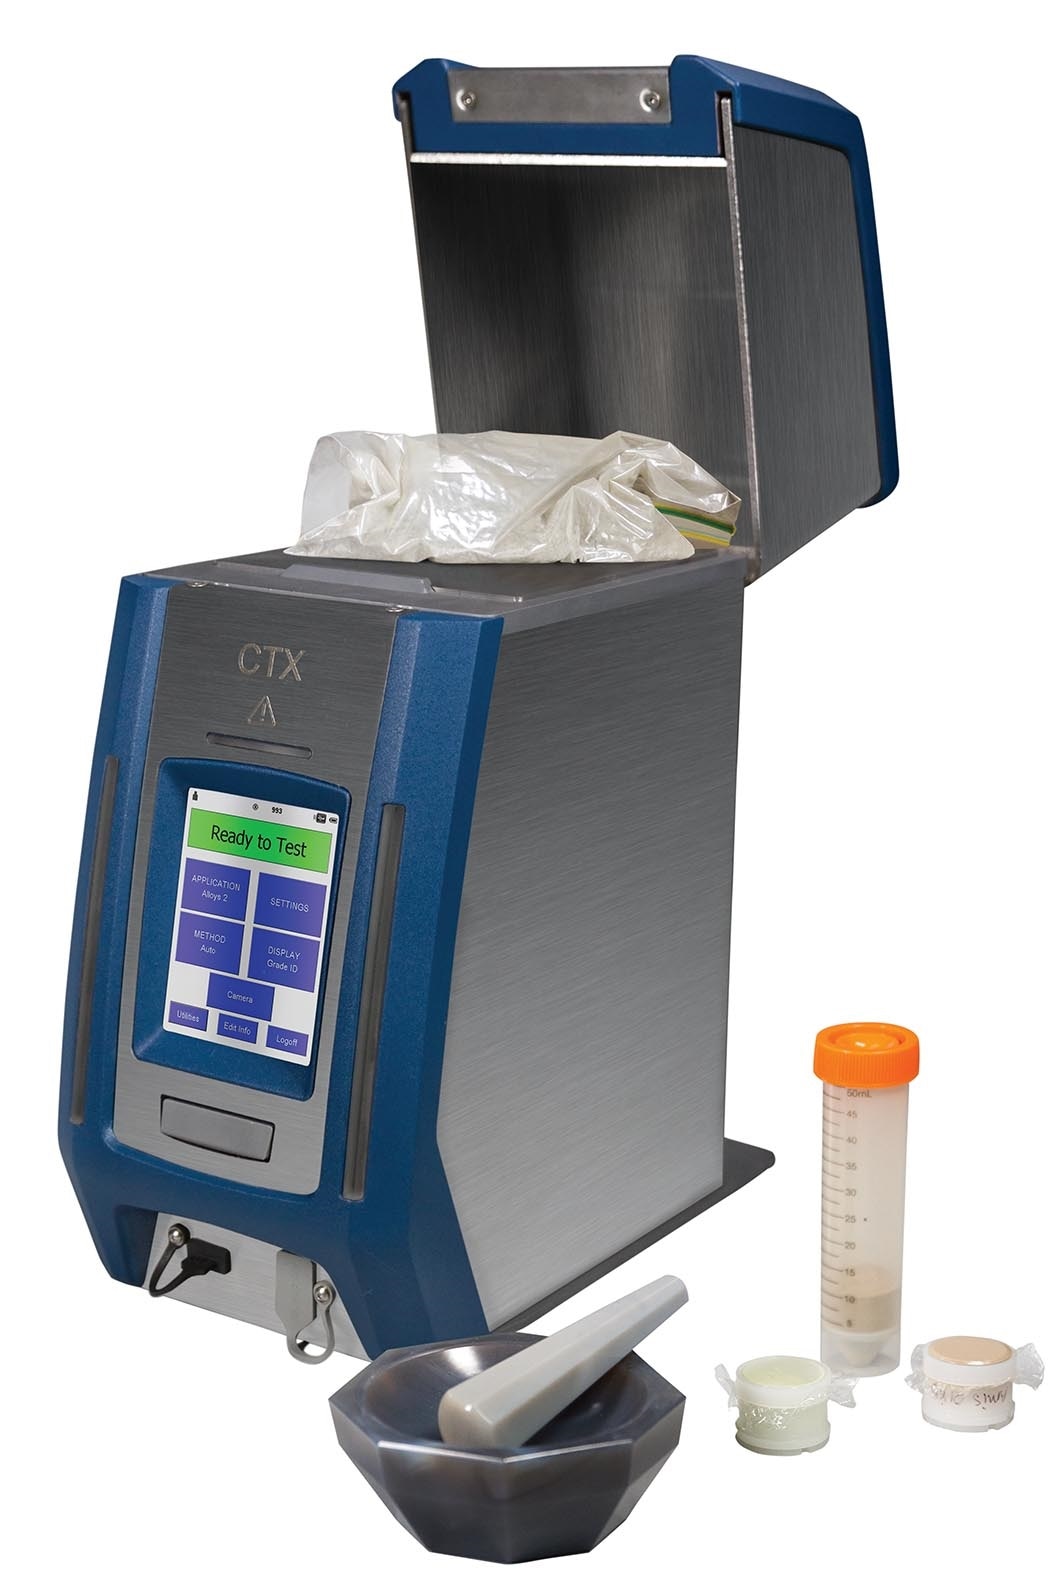 New Ctx™ X Ray Fluorescence Elemental Analyzer Introduced By Bruker At